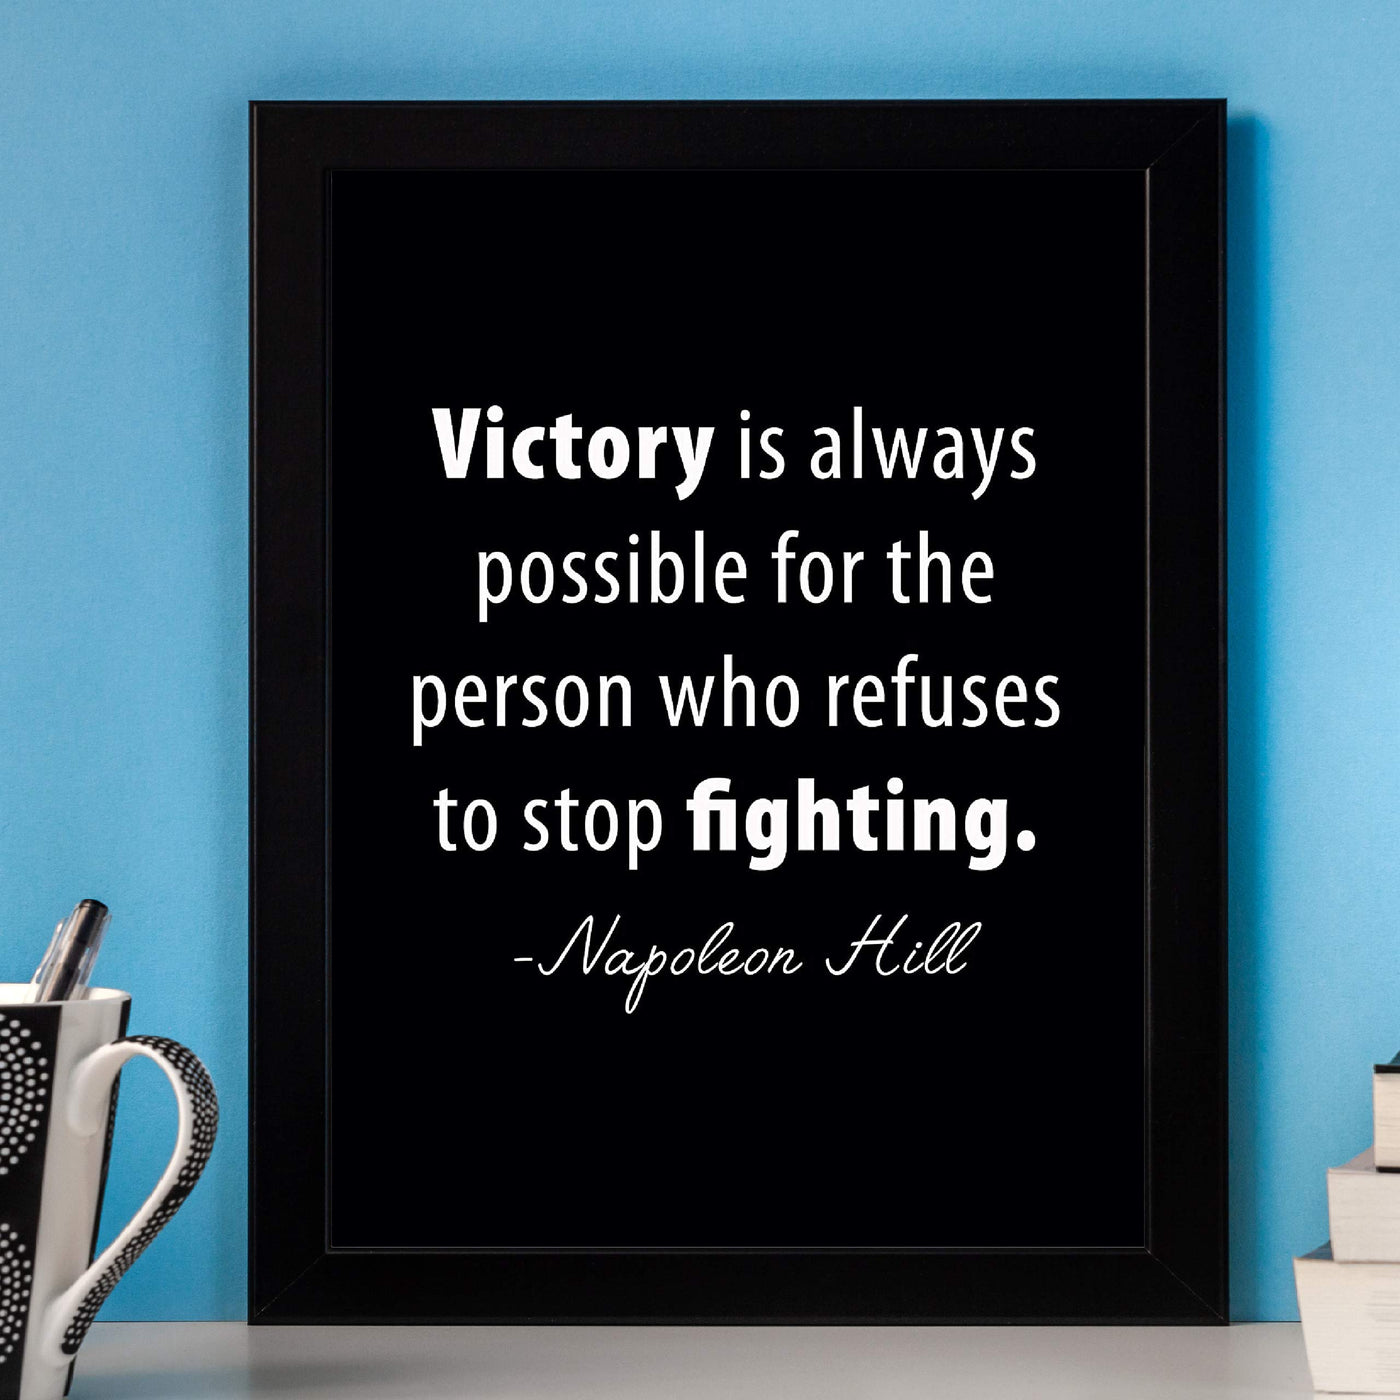 Napoleon Hill Quotes-"Victory Is Possible for Those Who Stop Fighting" Inspirational Wall Art -8 x 10" Modern Typographic Print-Ready to Frame. Motivational Decor for Home-Office-Gym-School.